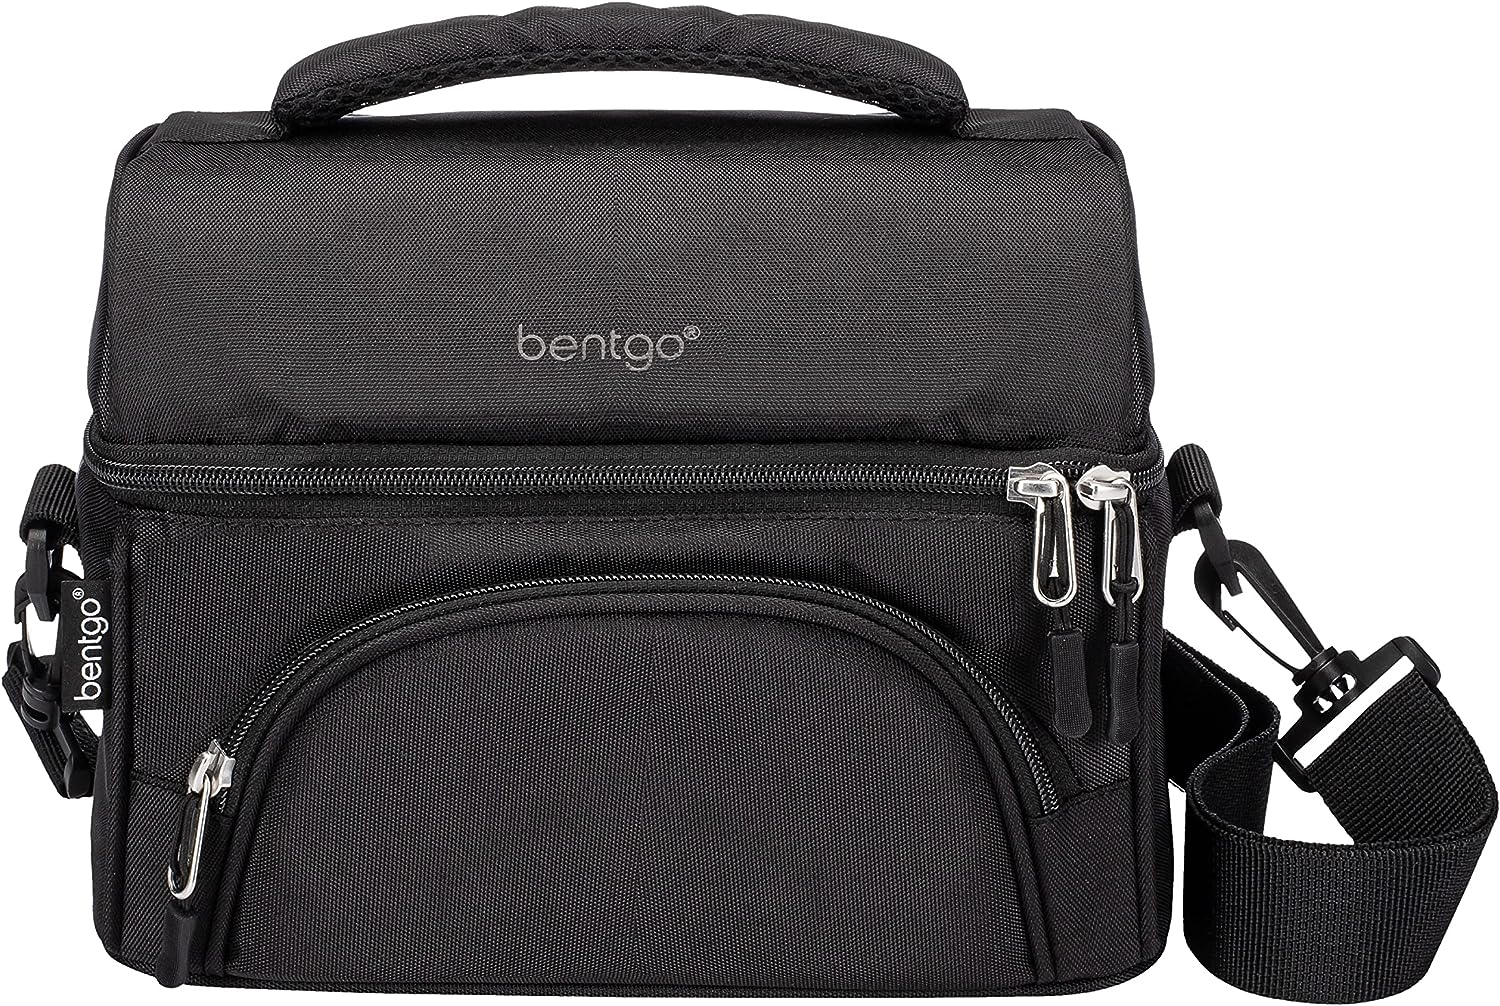 Bentgo® Deluxe Lunch Bag - Durable and Insulated Lunch Tote with Zippered Outer